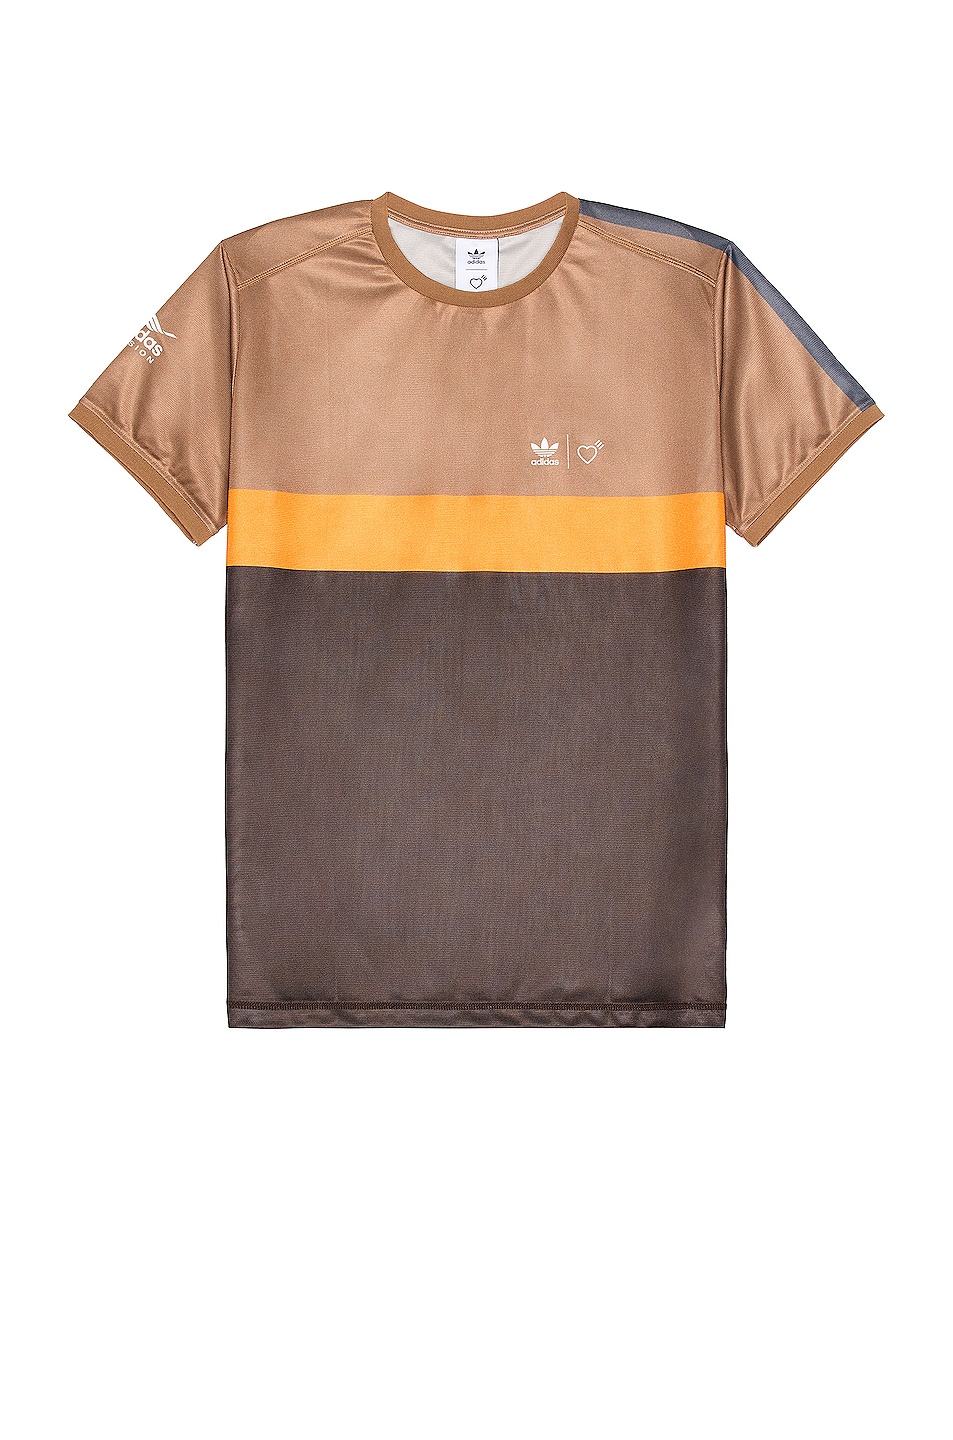 Image 1 of adidas x HUMAN MADE Graphic Tee in Tan